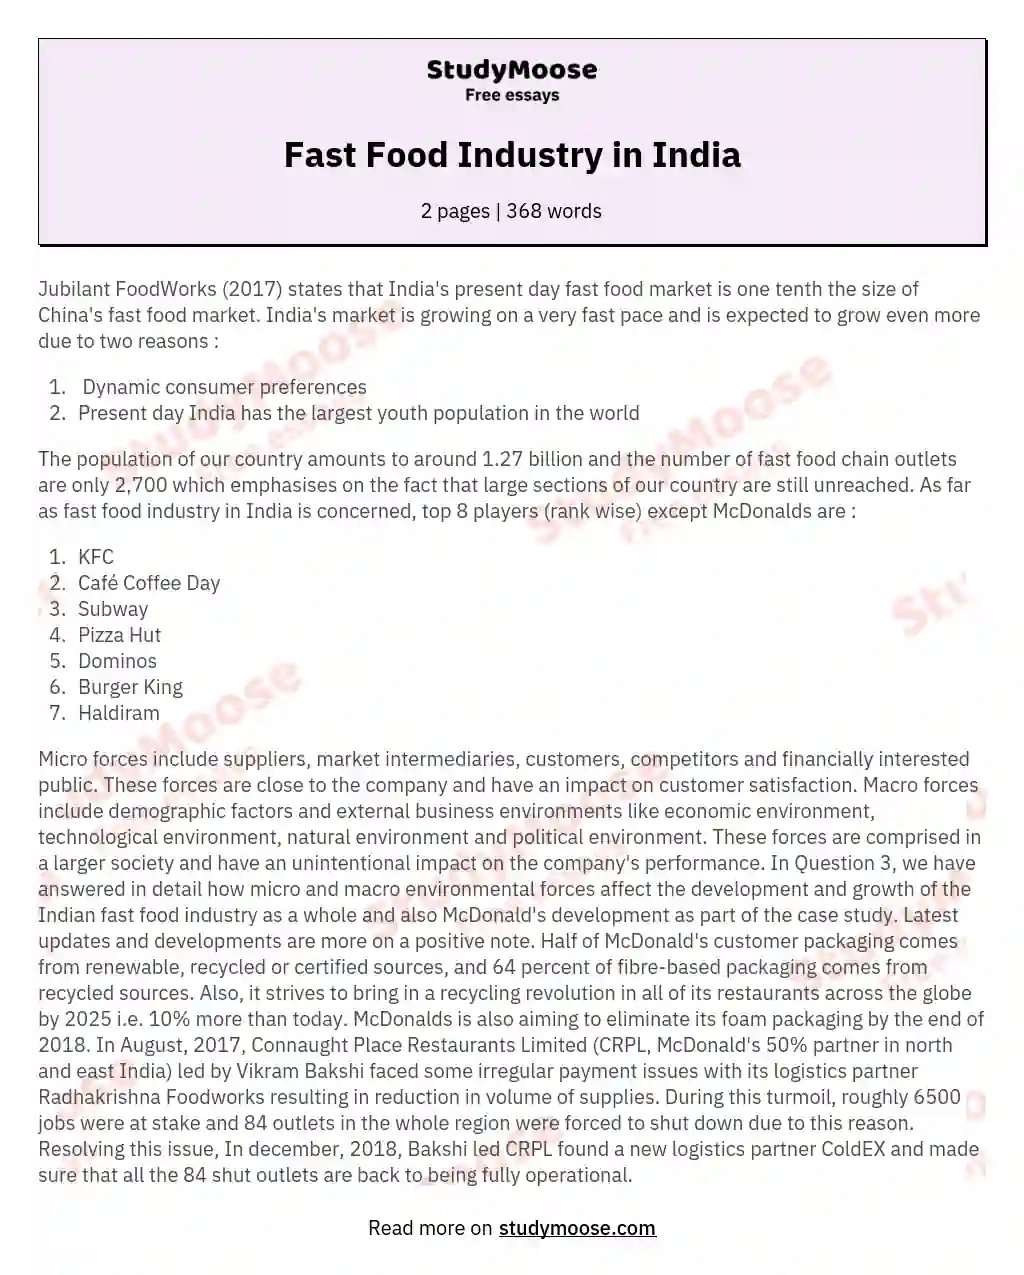 Fast Food Industry in India essay